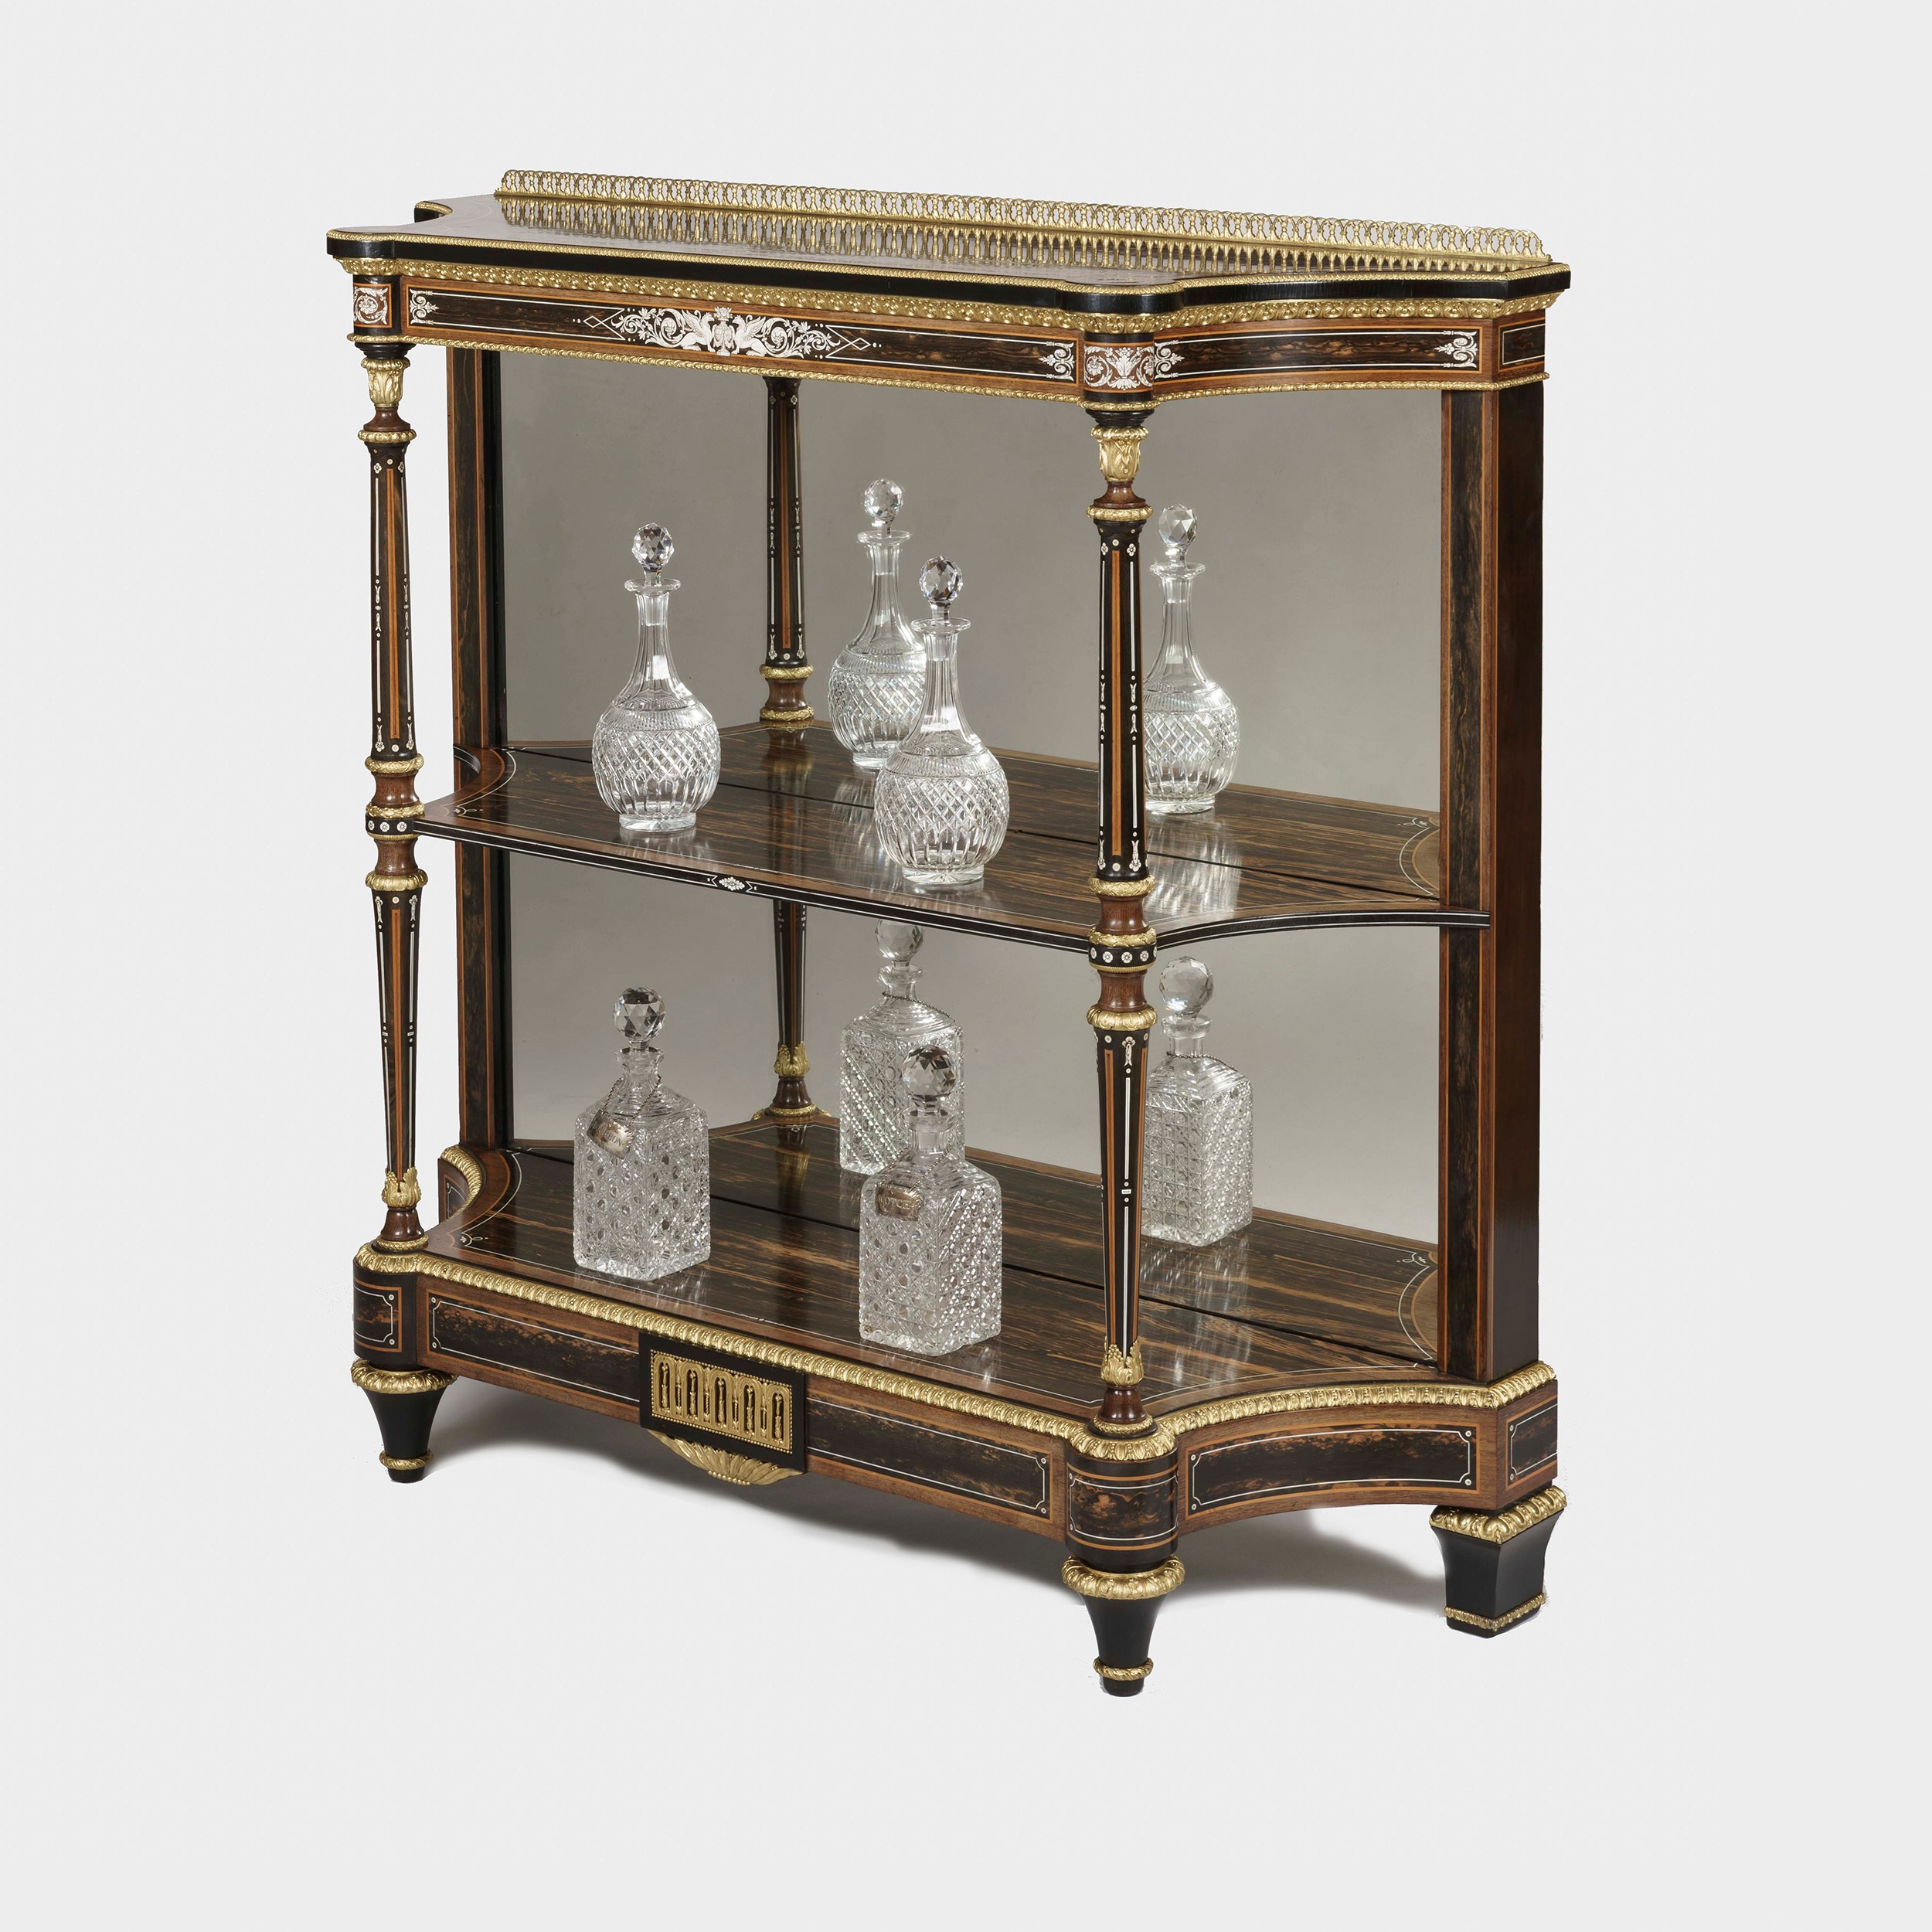 A Fine 19th Century Inlaid Etagere Attributed to Holland & Sons